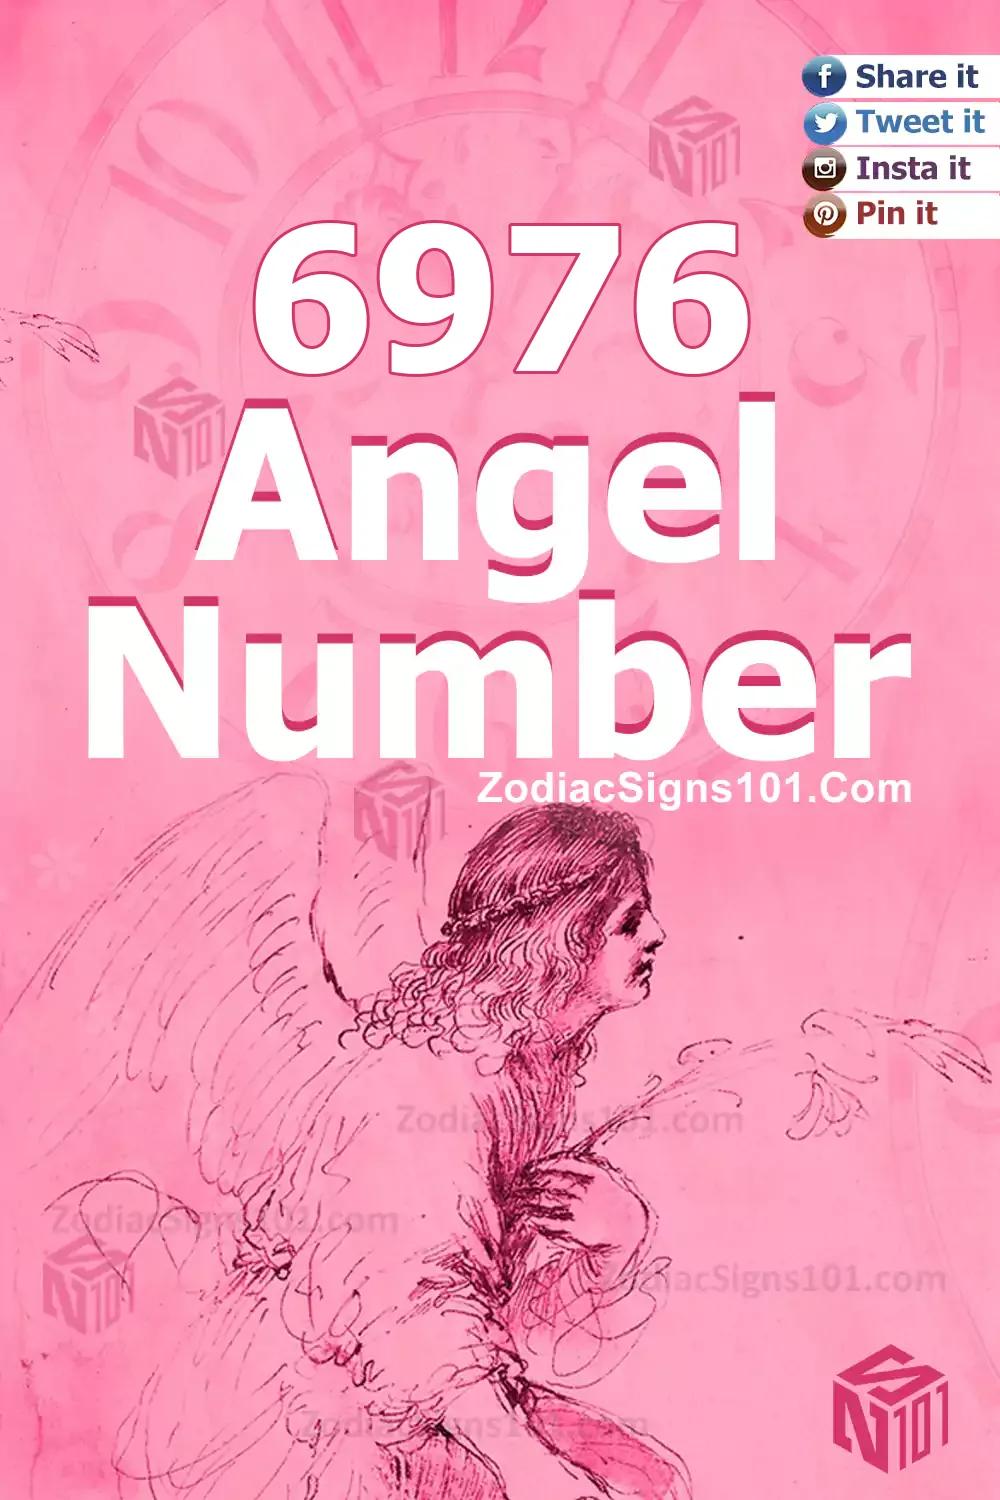 6976 Angel Number Meaning